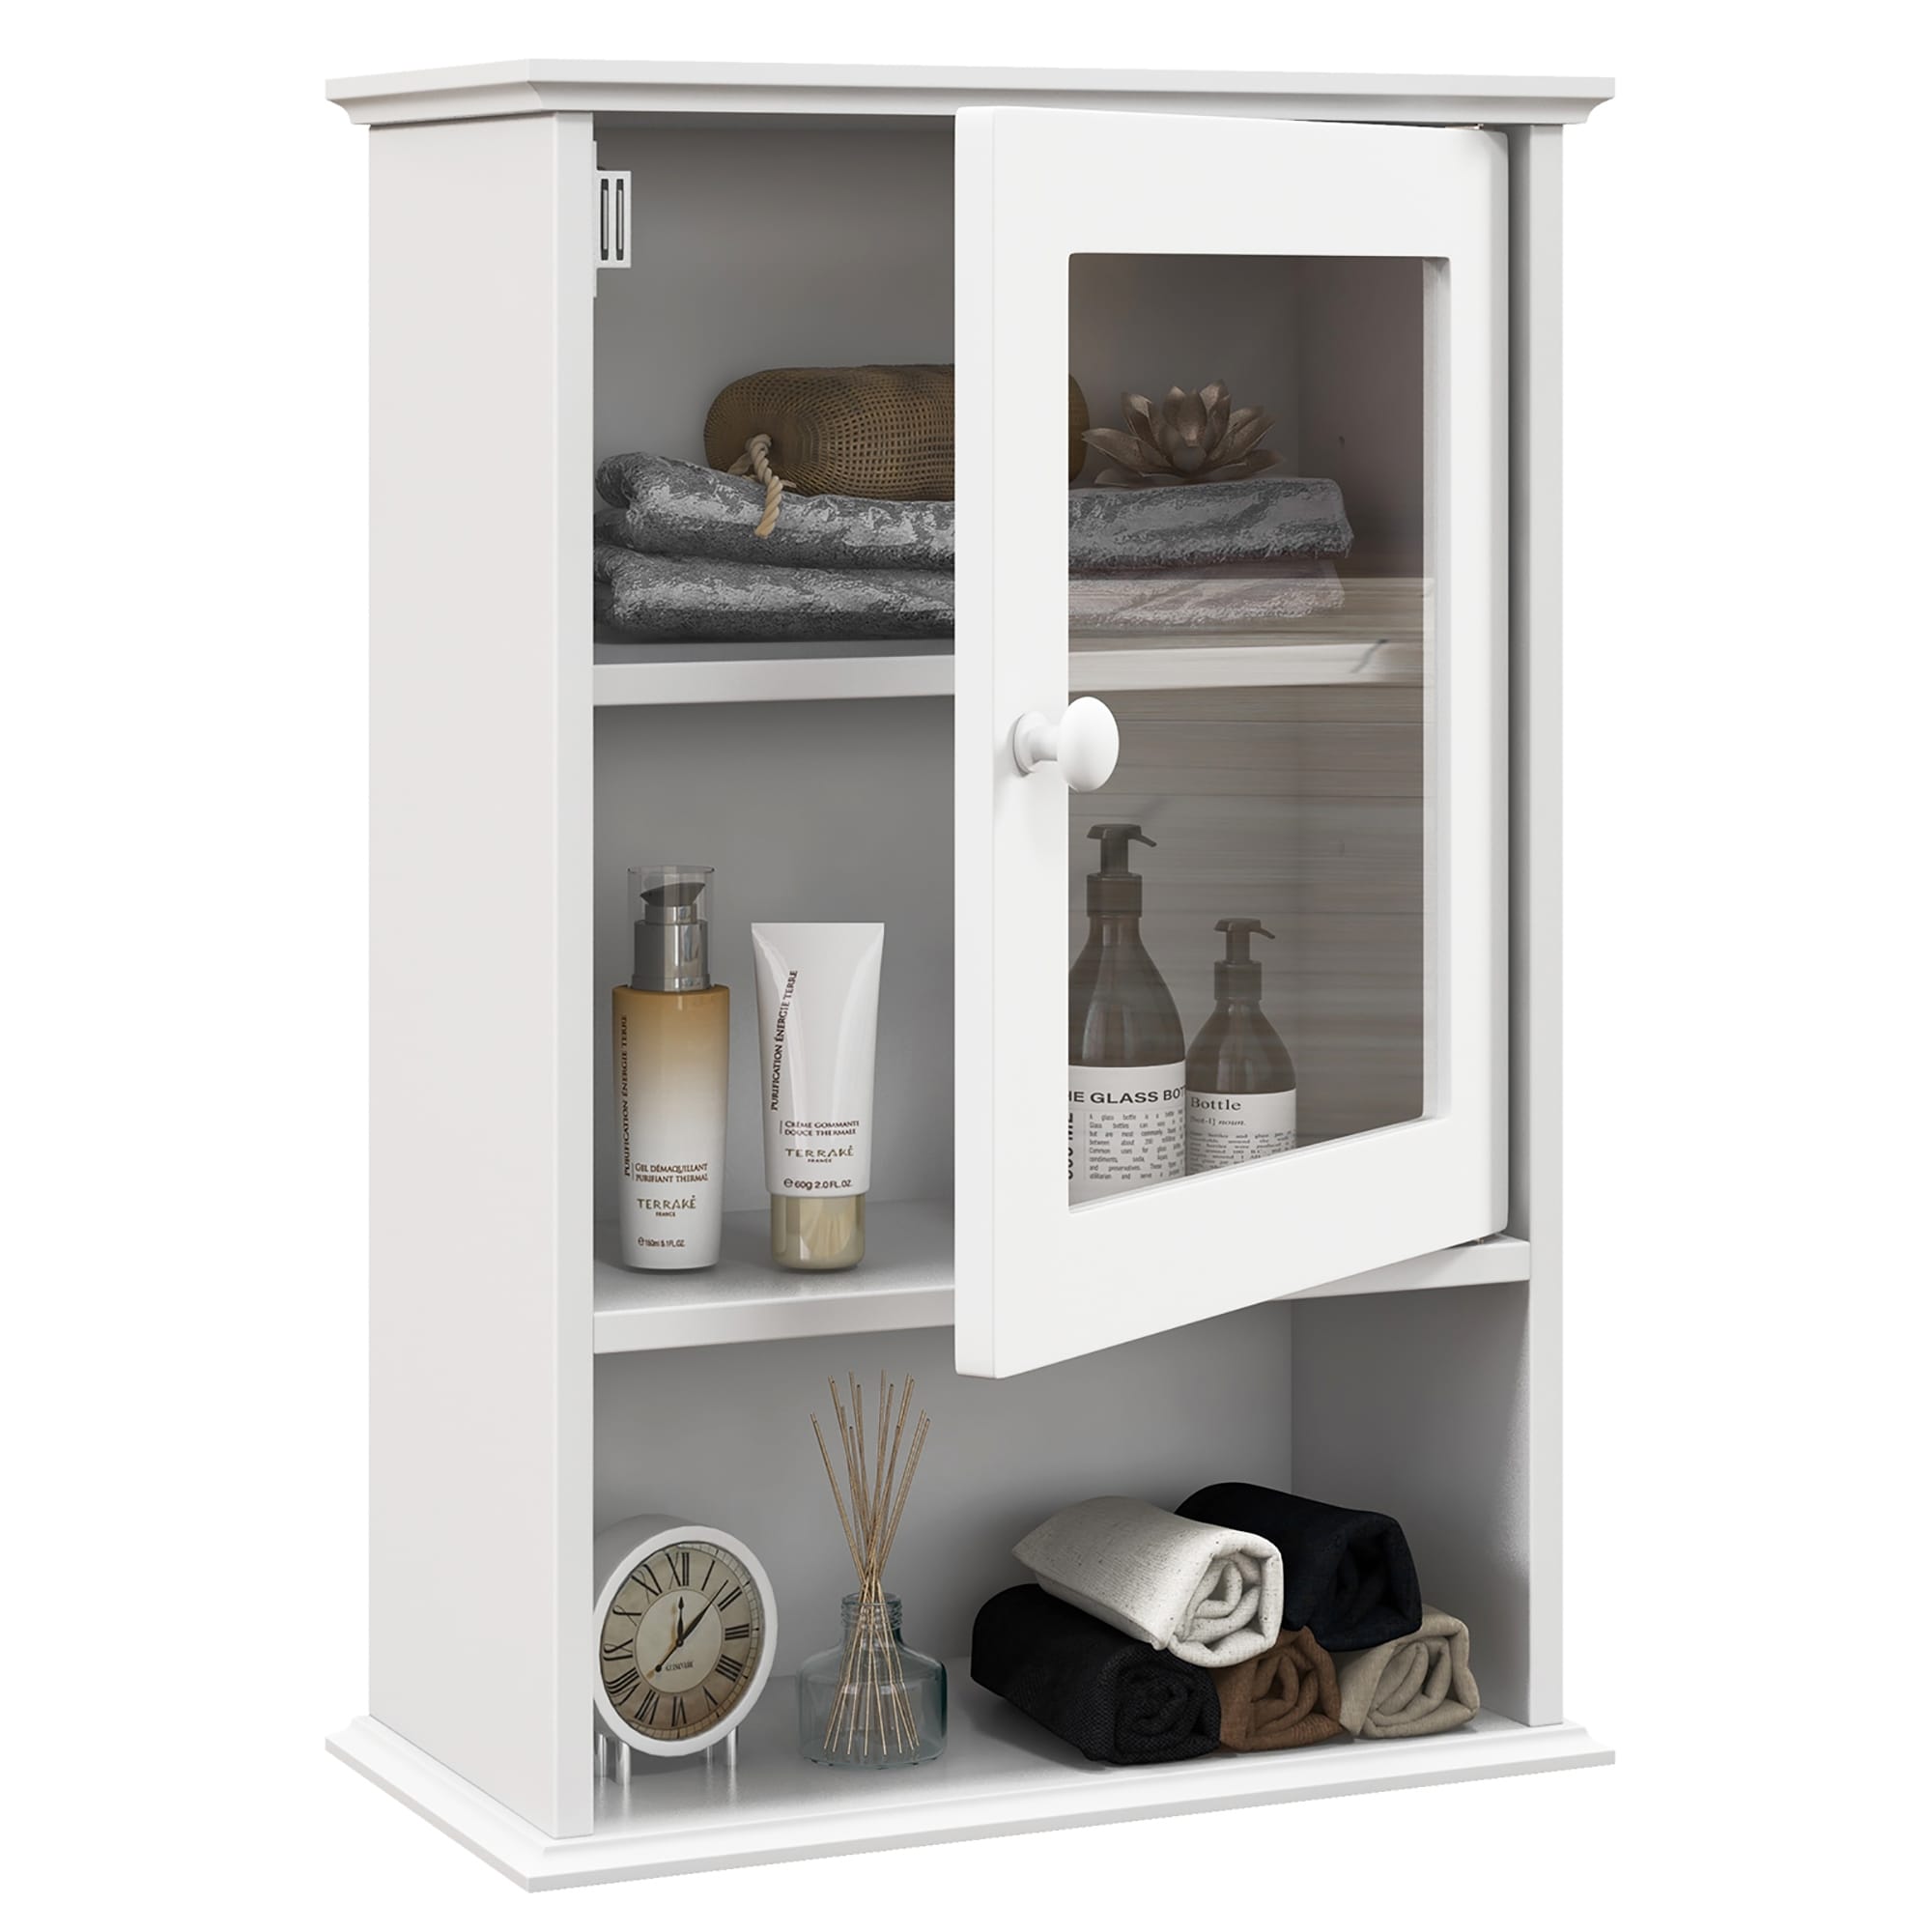 https://ak1.ostkcdn.com/images/products/is/images/direct/44e35ead8c4b63a85b92fe5efef10ea5a93e2d17/Gymax-Wall-Mounted-Bathroom-Cabinet-Storage-Organize-Hanging-Medicine.jpg